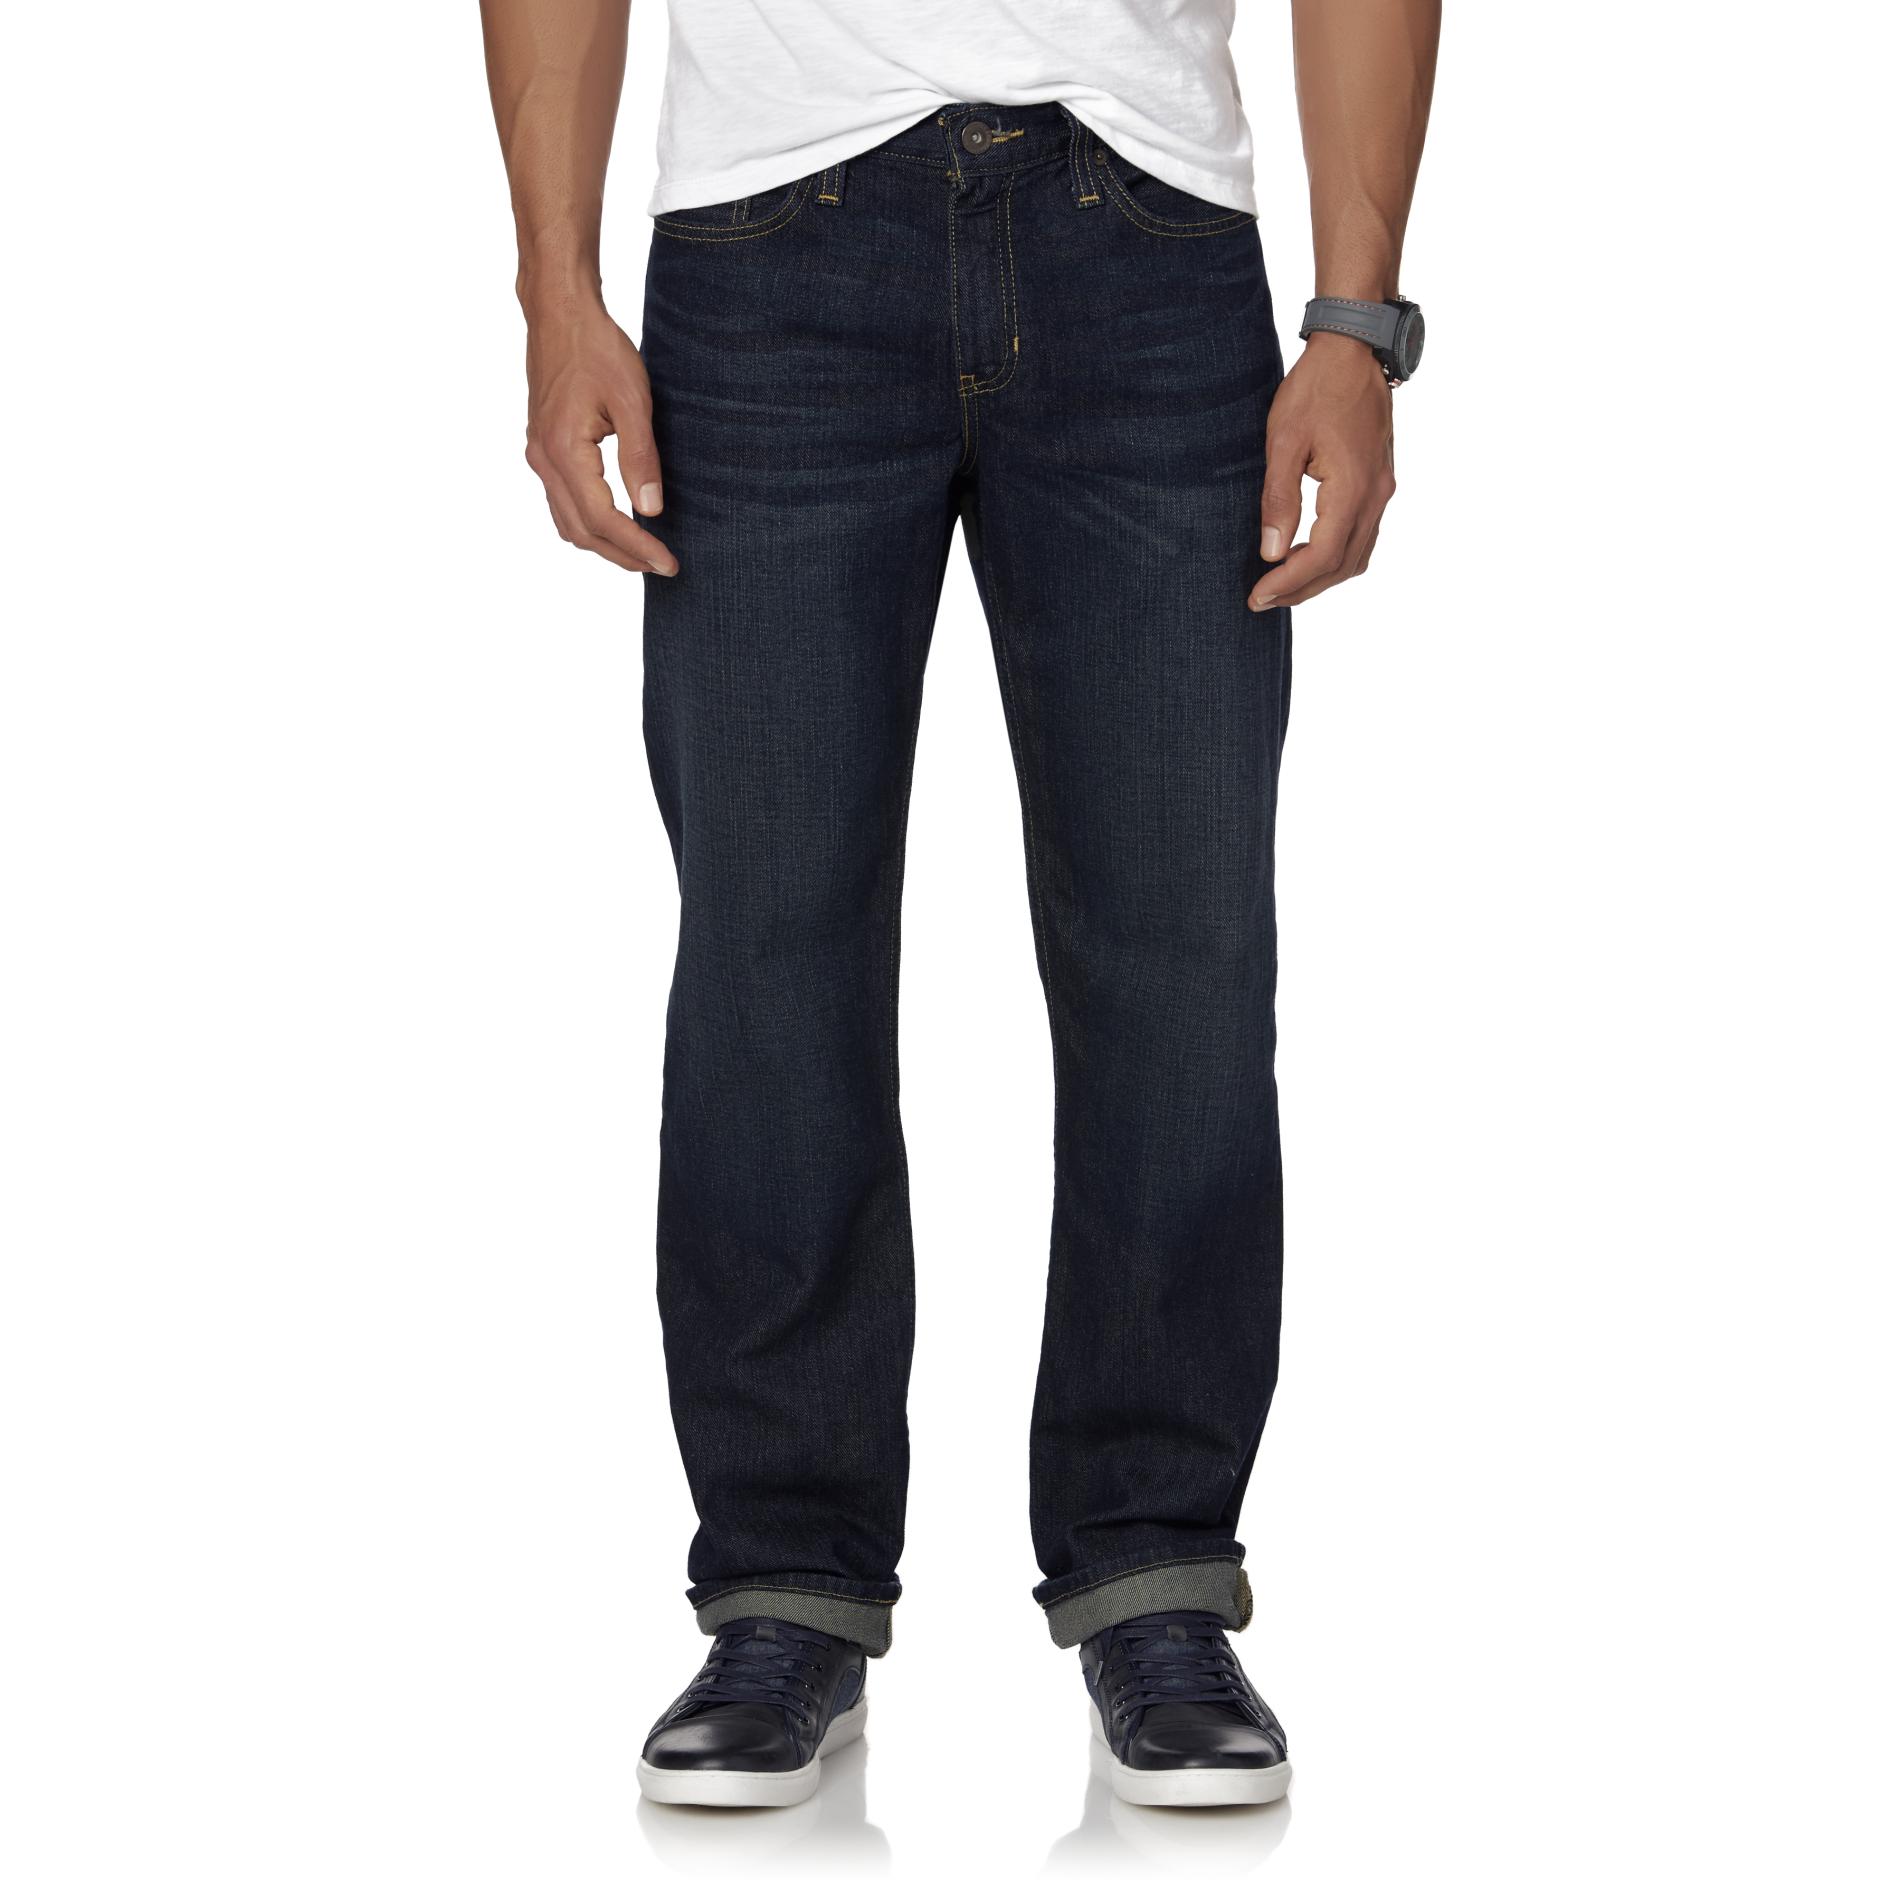 Roebuck & Co. Young Men's Slim Straight Jeans - Sears